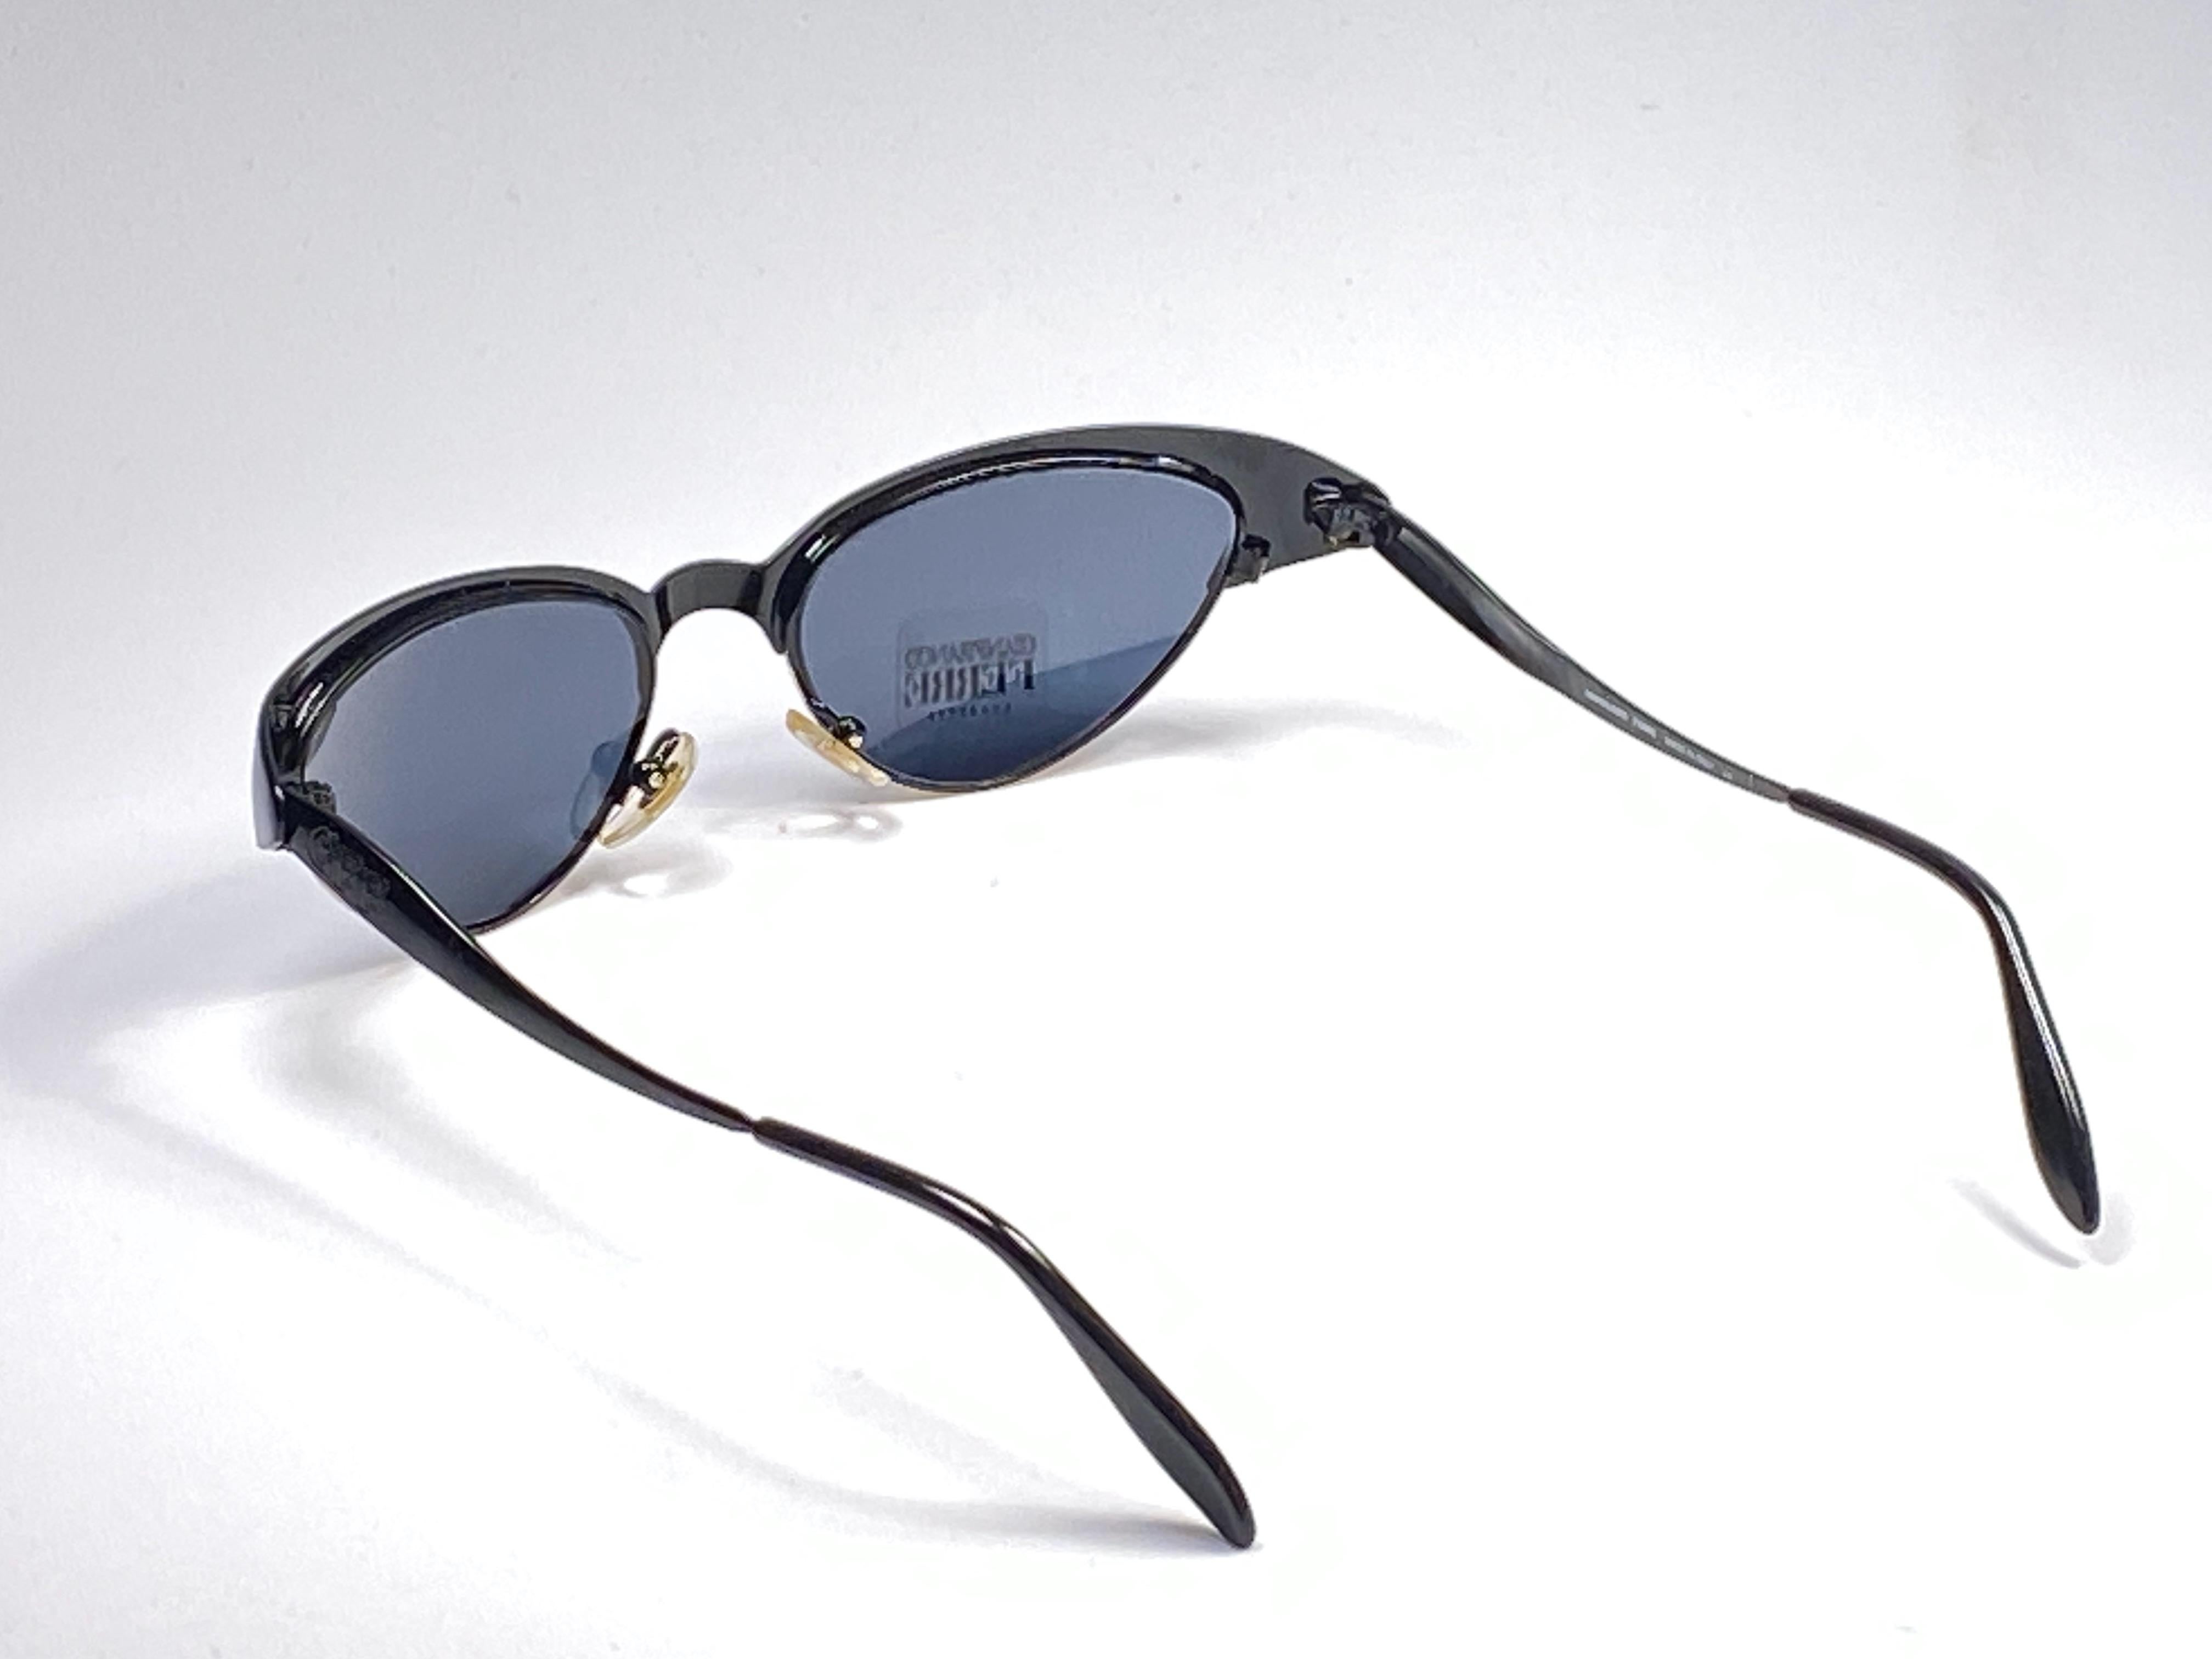 New Vintage Gianfranco Ferré GFF 367 Gold / Black Cat Eye 1990  Italy Sunglasses In New Condition For Sale In Baleares, Baleares